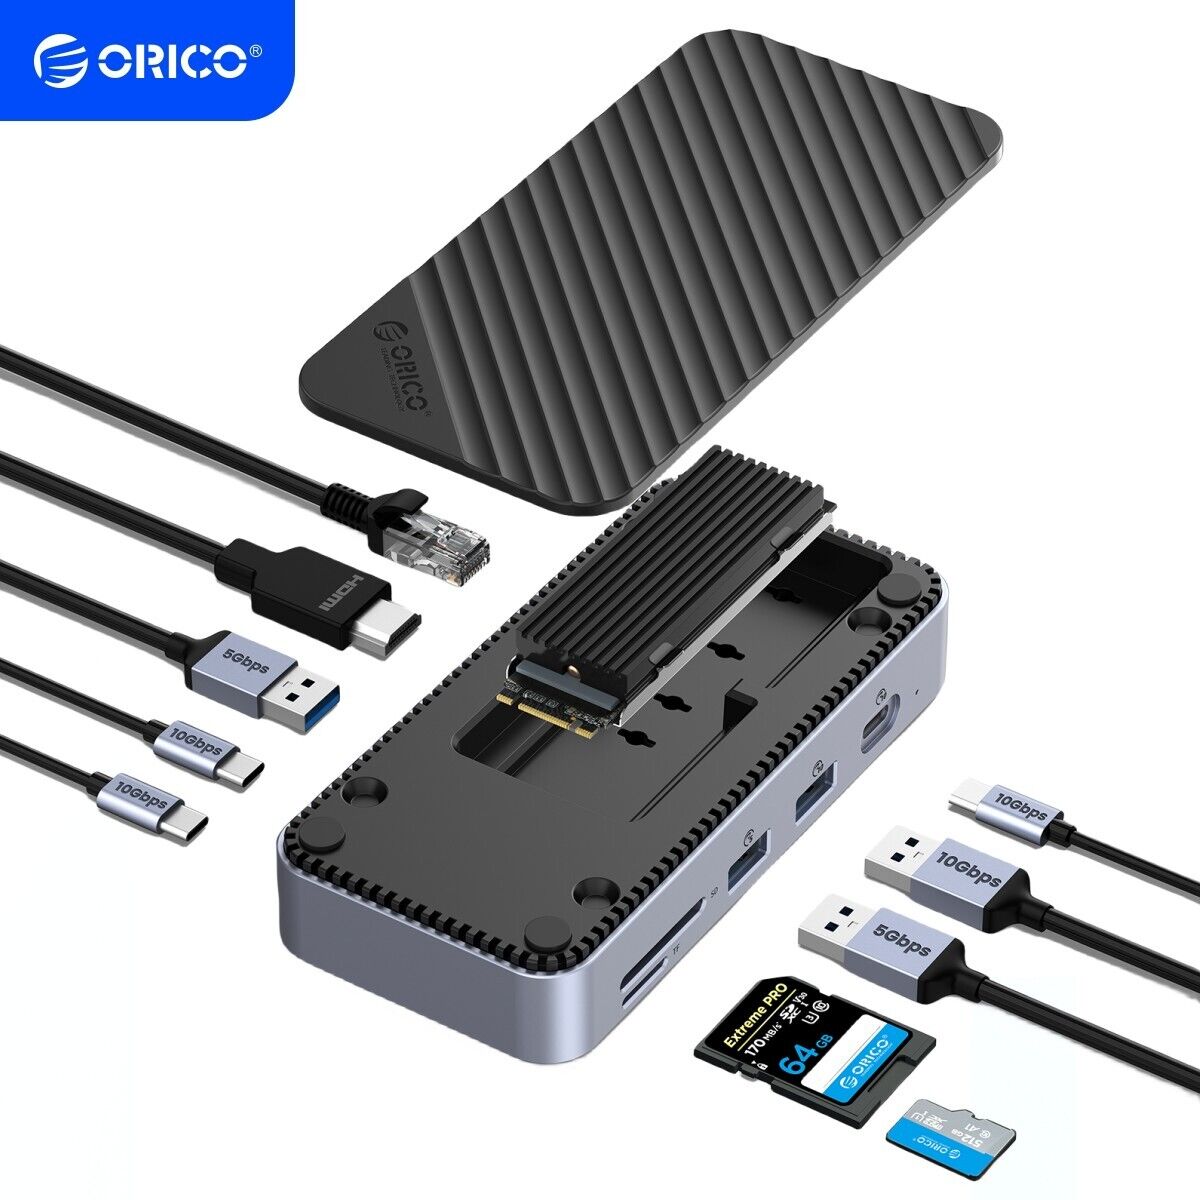 ORICO 10 in 1 USB HUB with M.2 NVMe SATA SSD Enclosure Docking Station Adapter